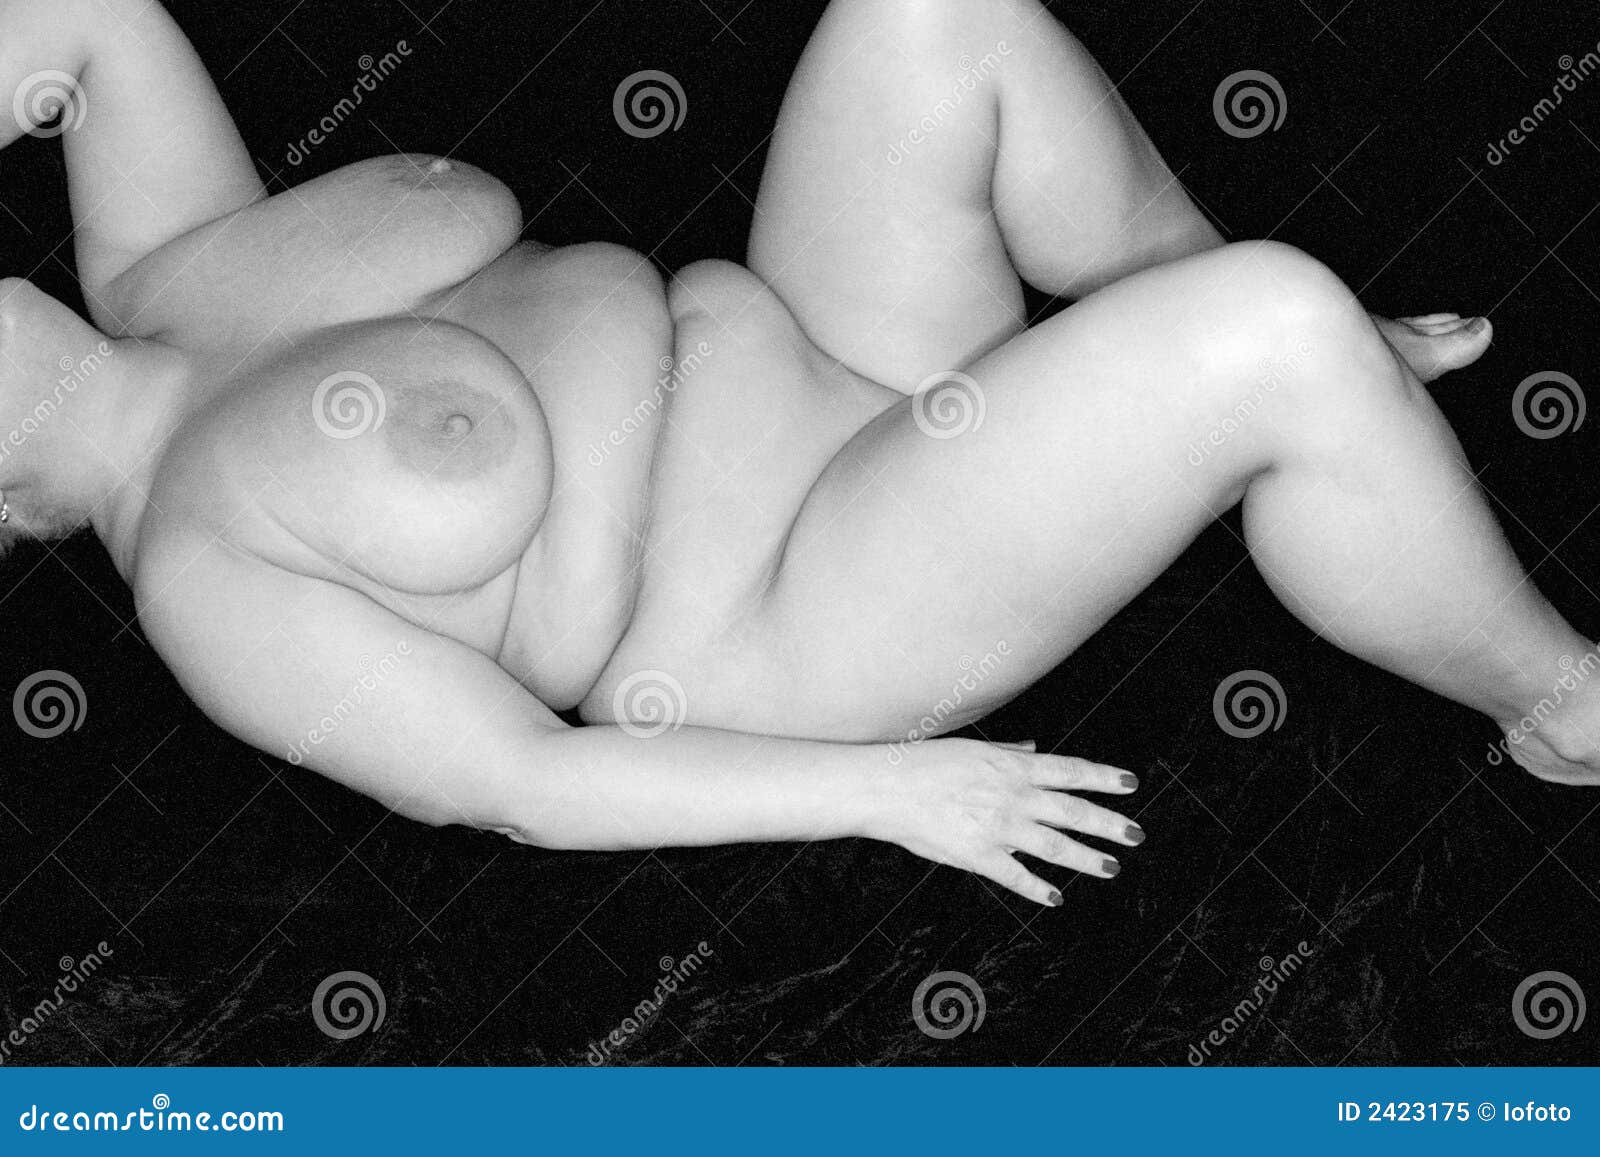 Free Fat Naked Pictures With Full Figured Women 70